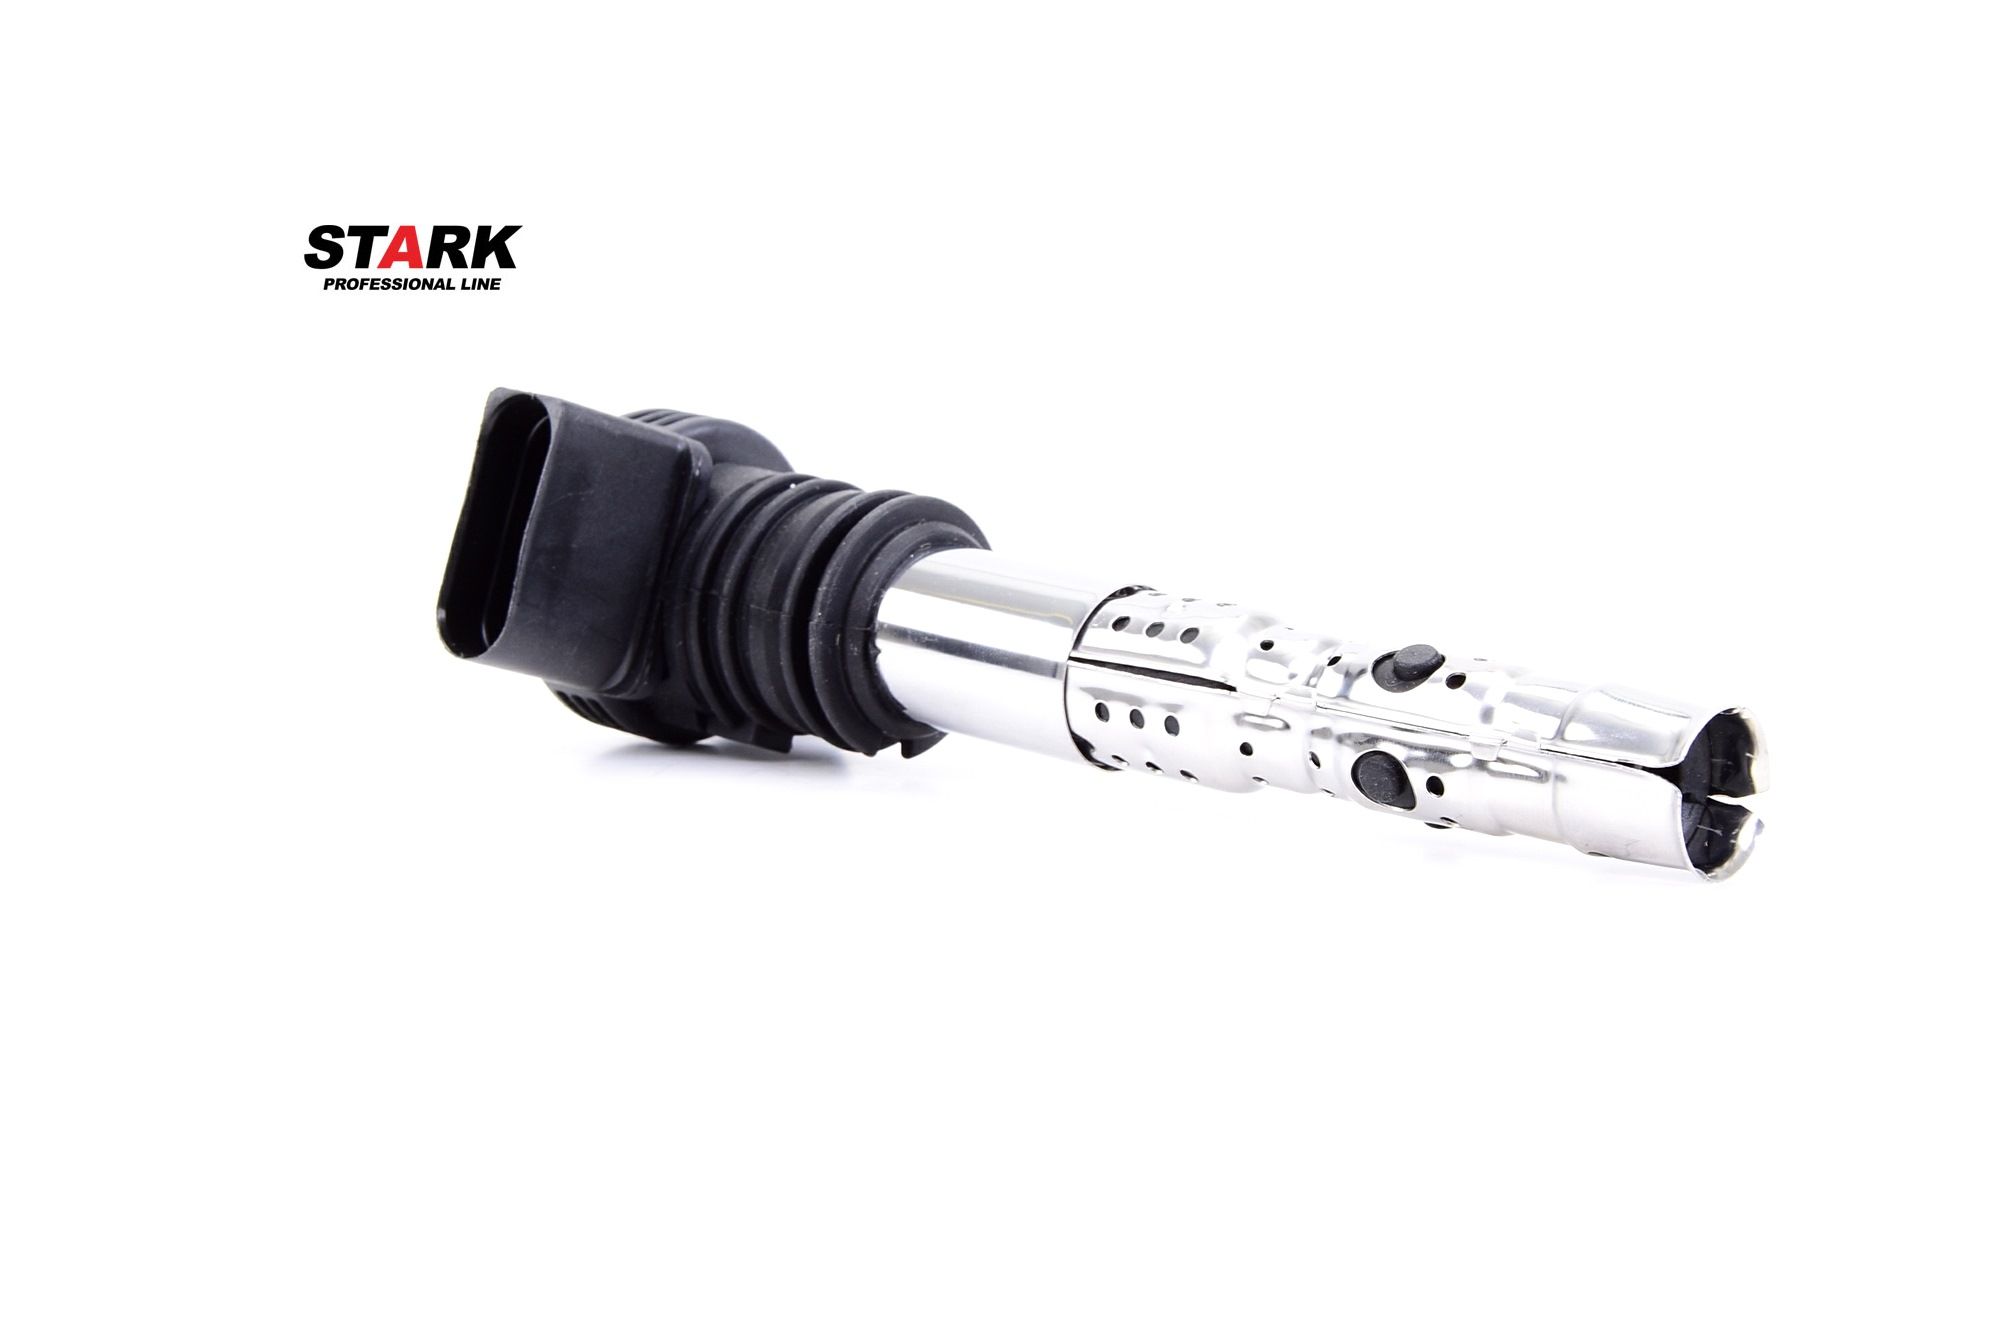 STARK SKCO-0070005 Ignition coil 4-pin connector, 12V, Number of connectors: 1, Flush-Fitting Pencil Ignition Coils, incl. spark plug connector